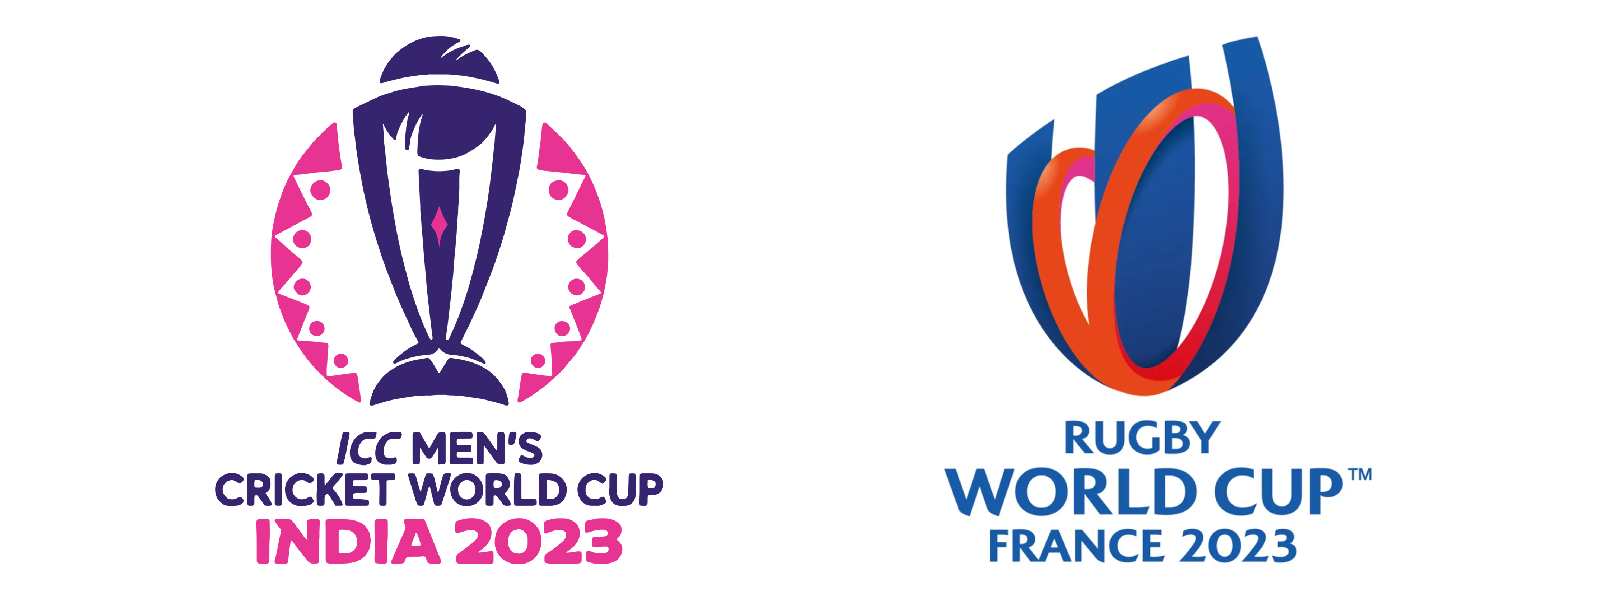 MTV Channel secures Cricket & Rugby World Cups